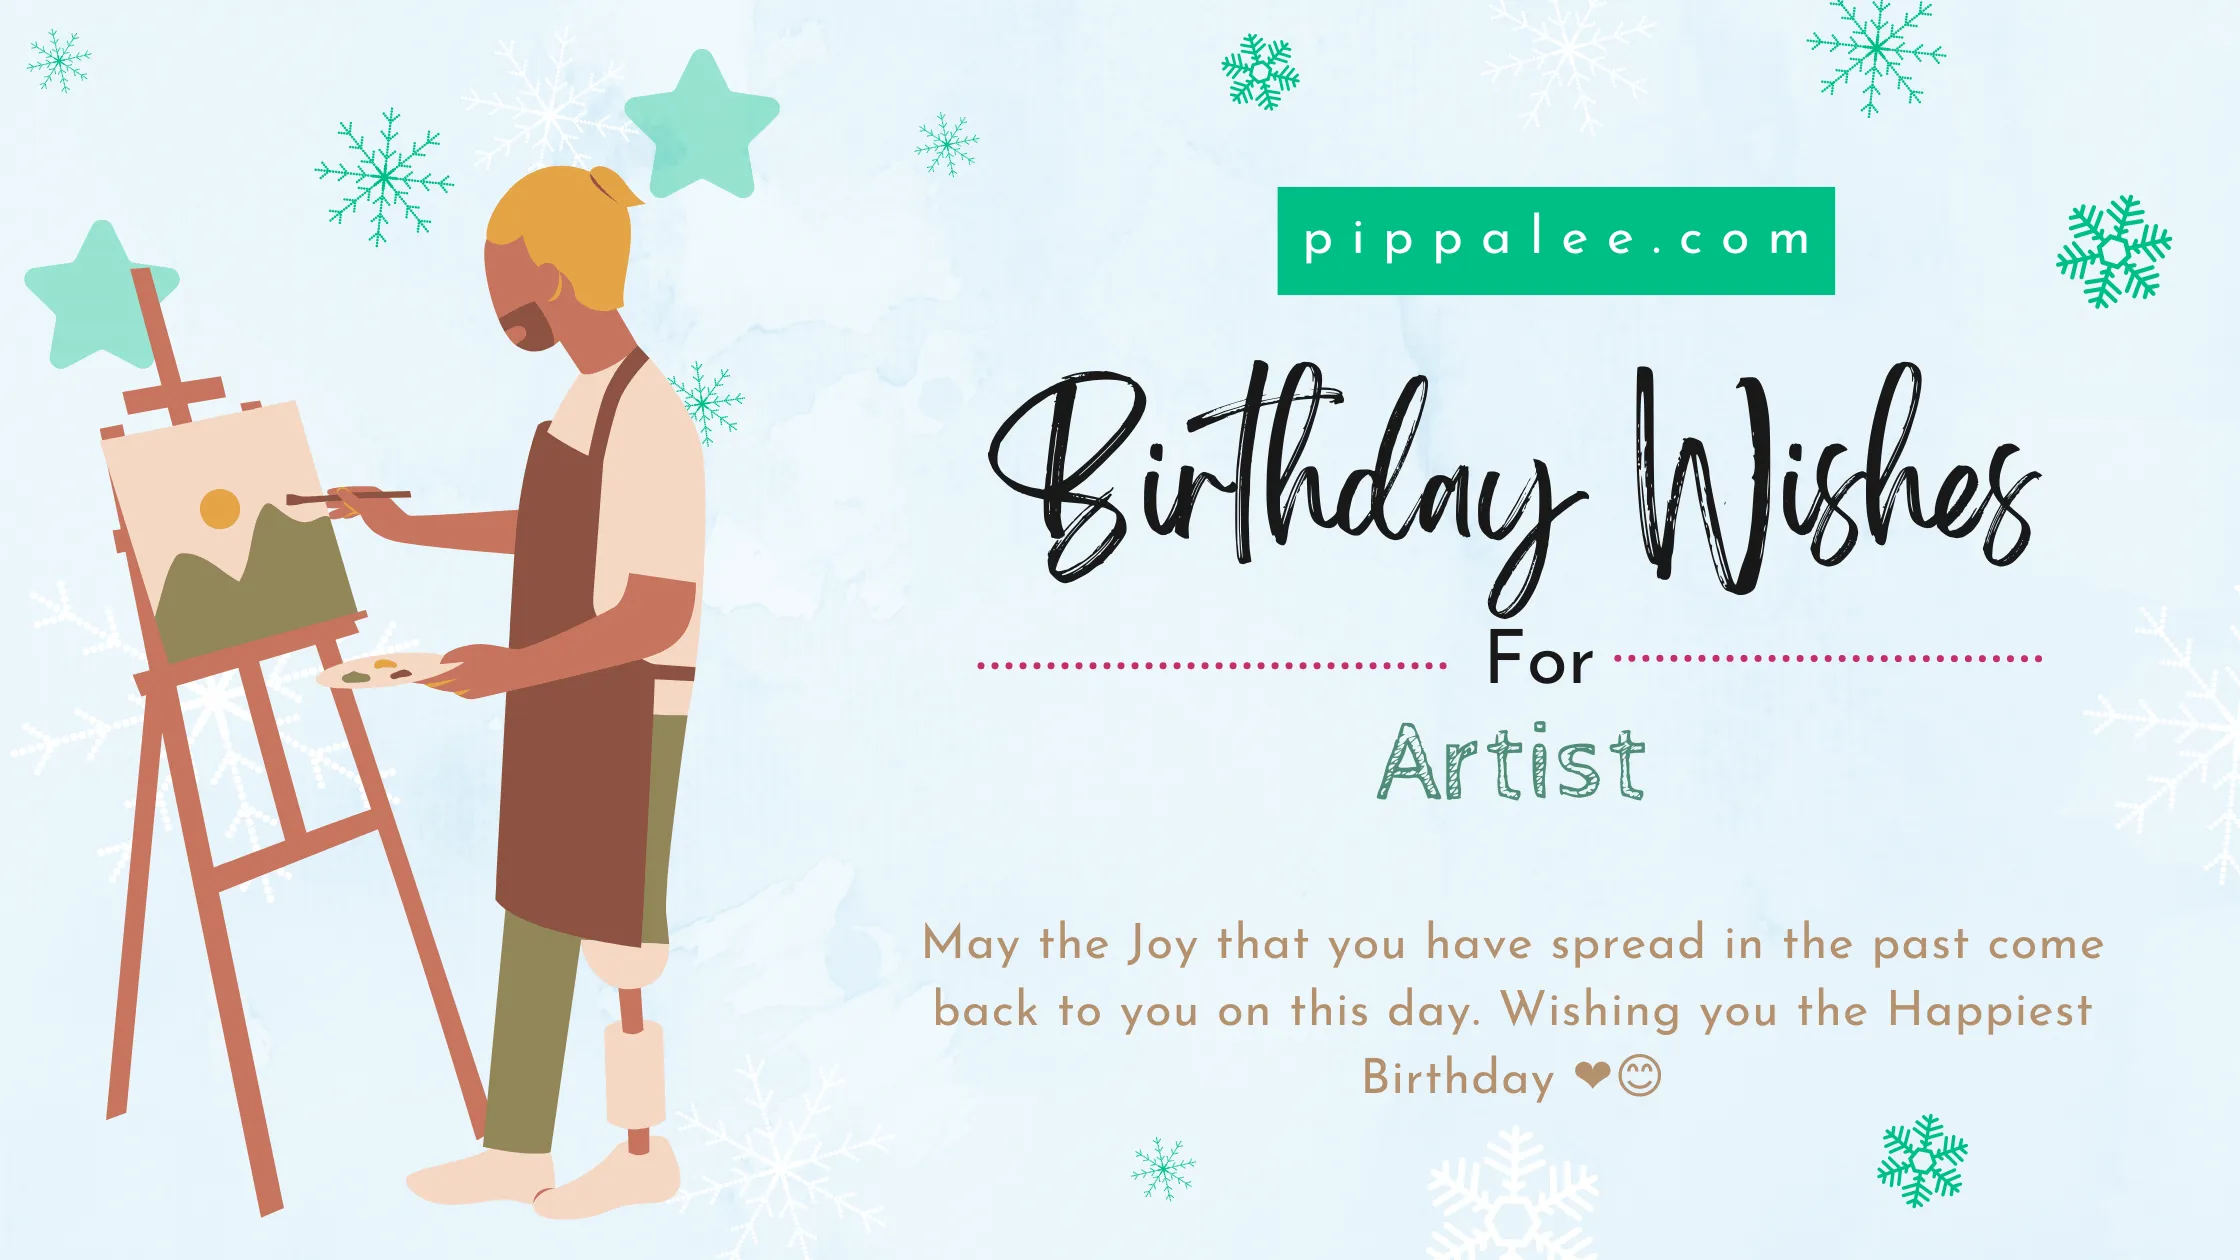 Birthday Wishes For Artist - Wishes & Messages